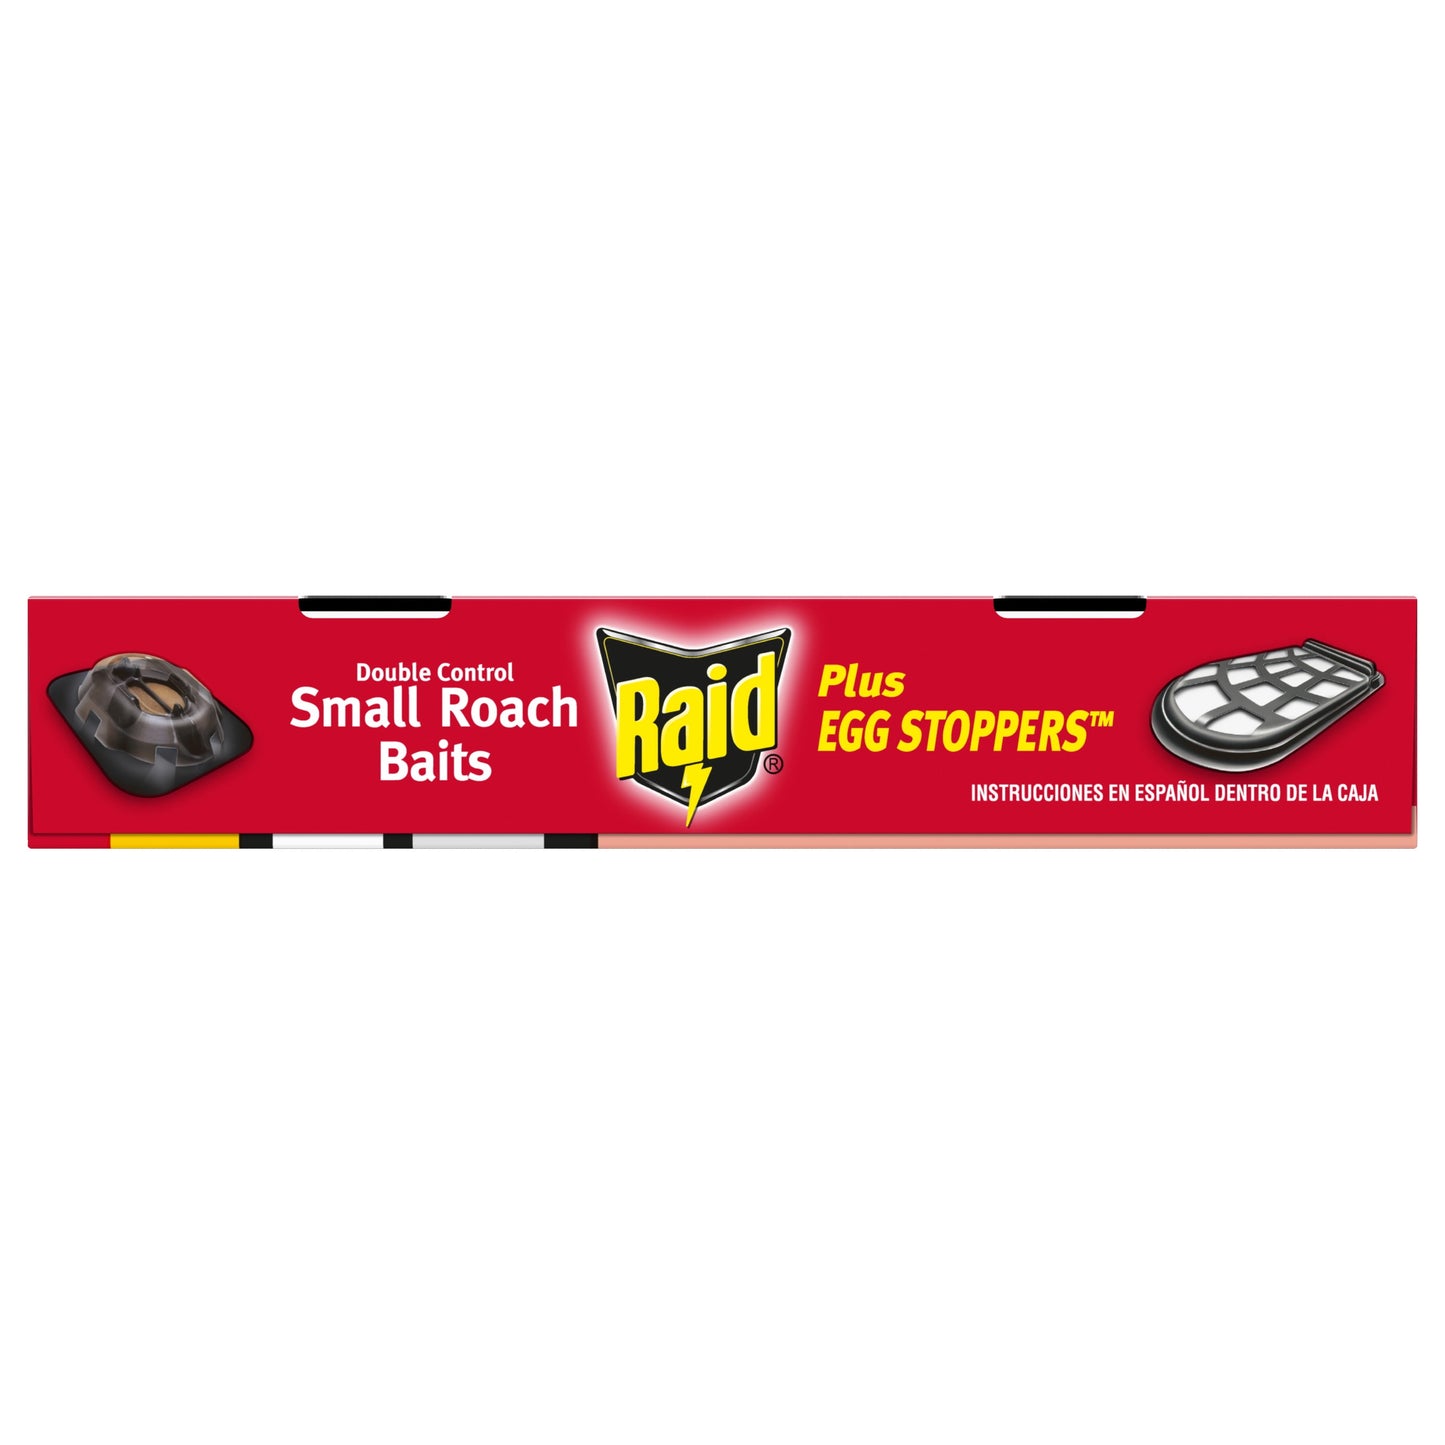 Raid® Double Control Small Roach Baits Plus Egg Stoppers for Cockroaches, 12 ct & 3 ct